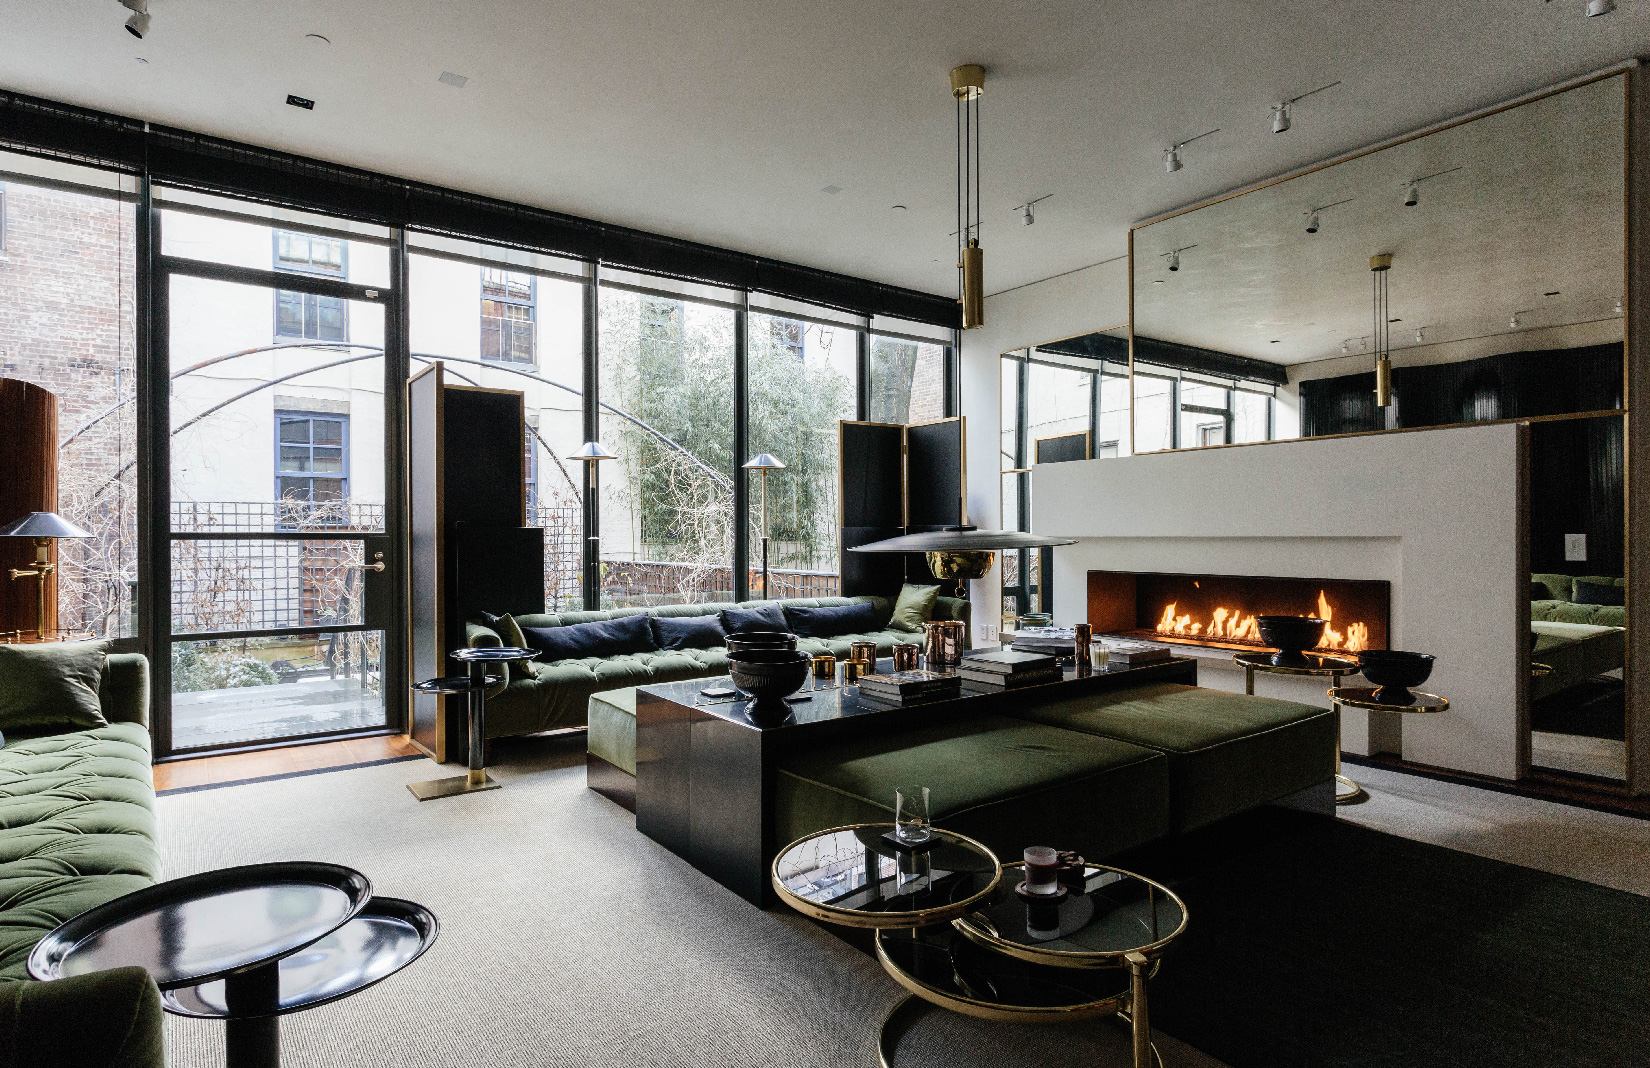 6 Of The Best New York Apartments To Rent